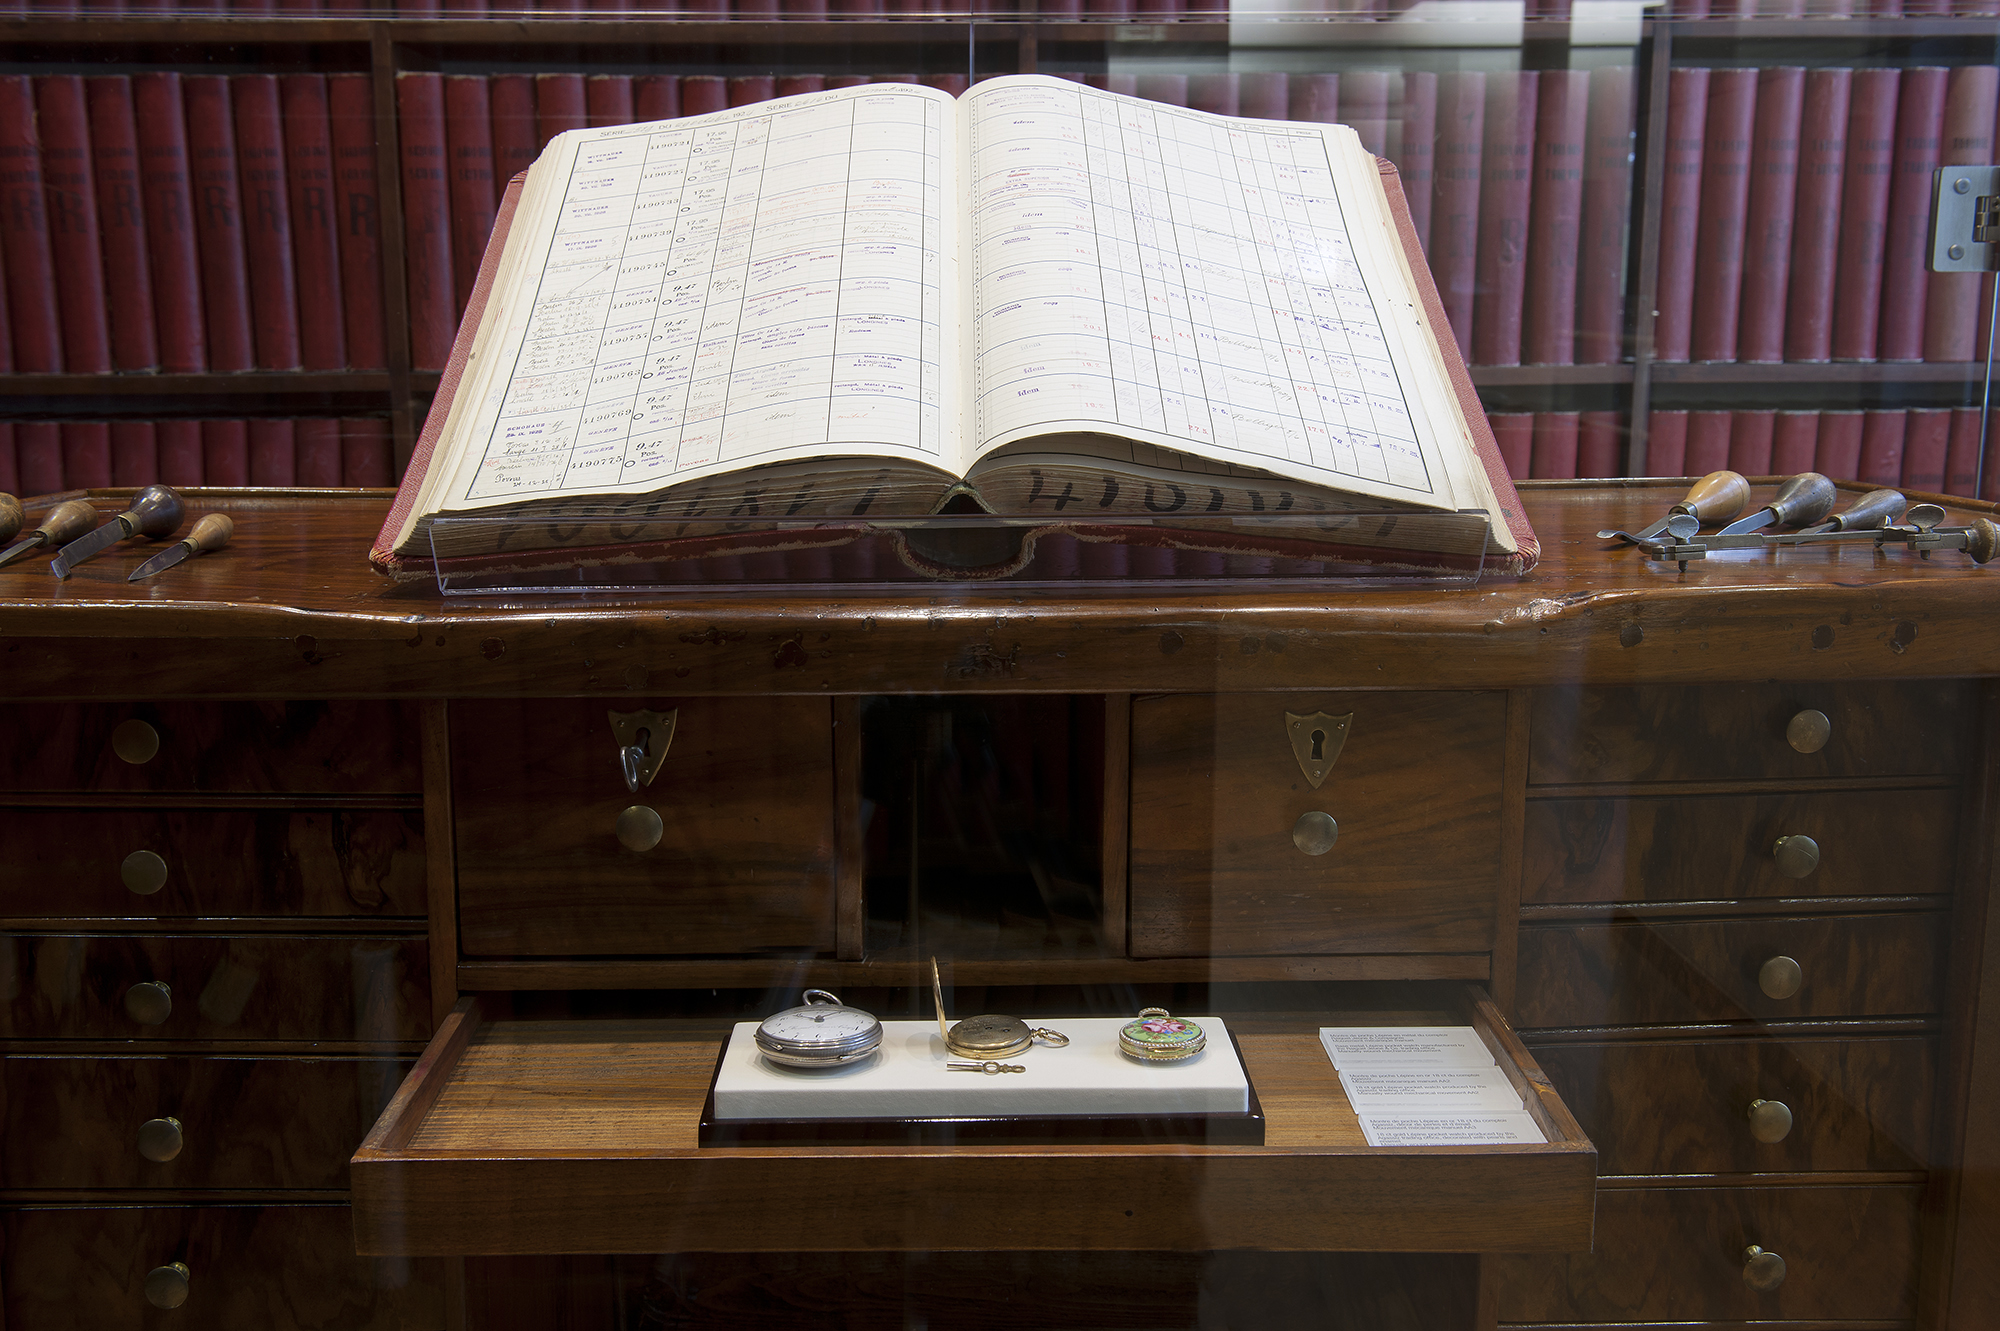 One of the written records put on display in the Archive Room.